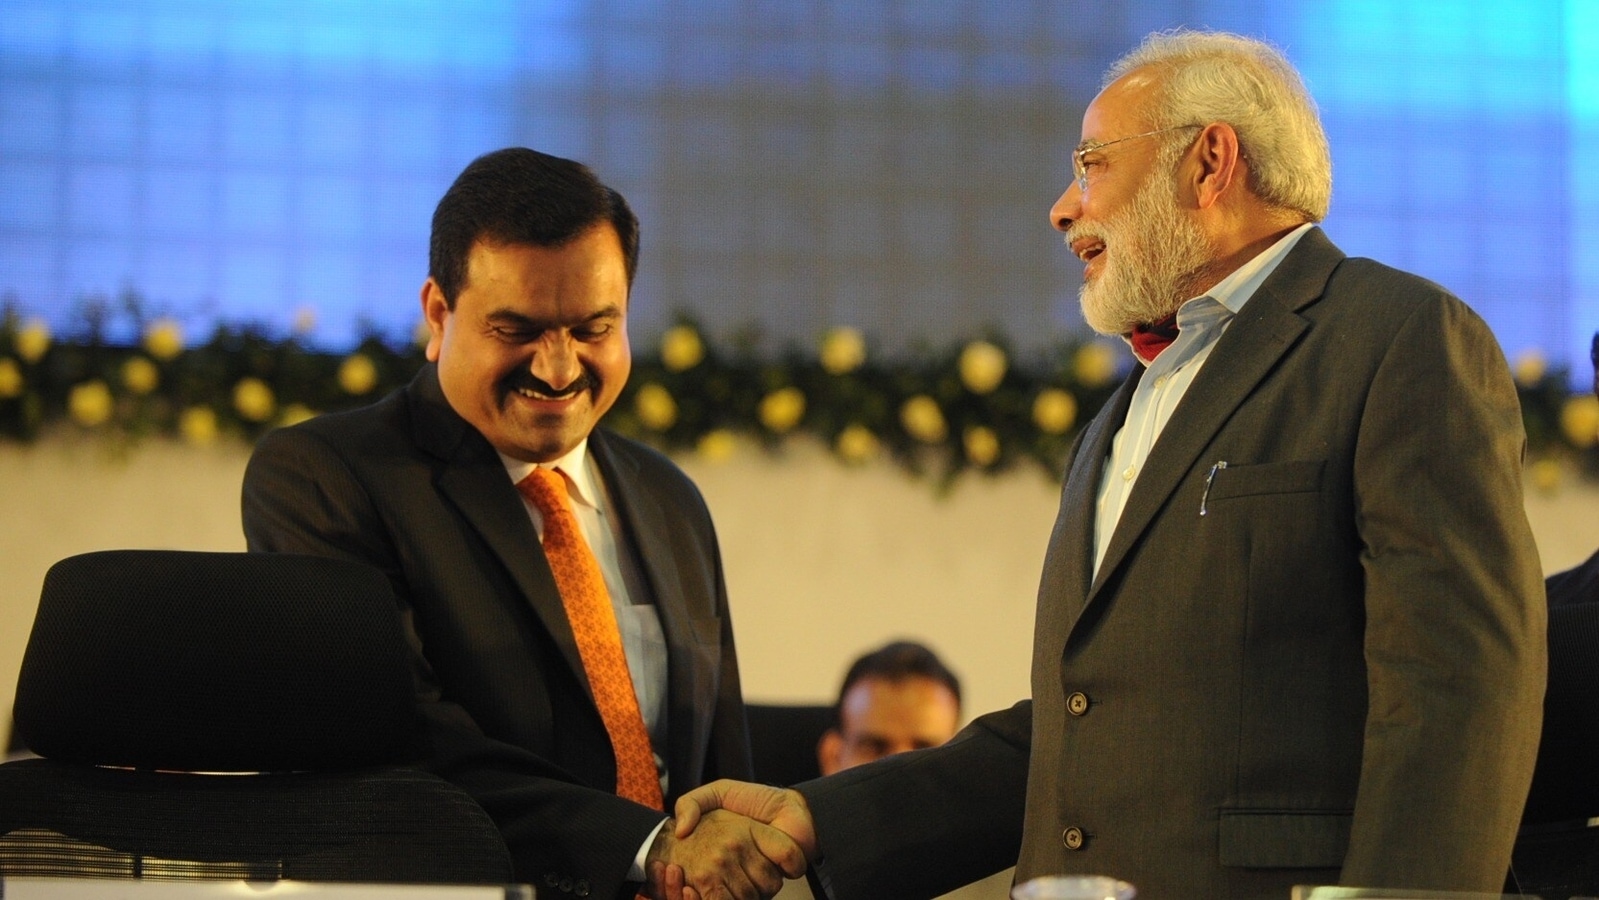 Baseless allegation': Adani dismisses PM Modi connection for his rise | Latest News India - Hindustan Times